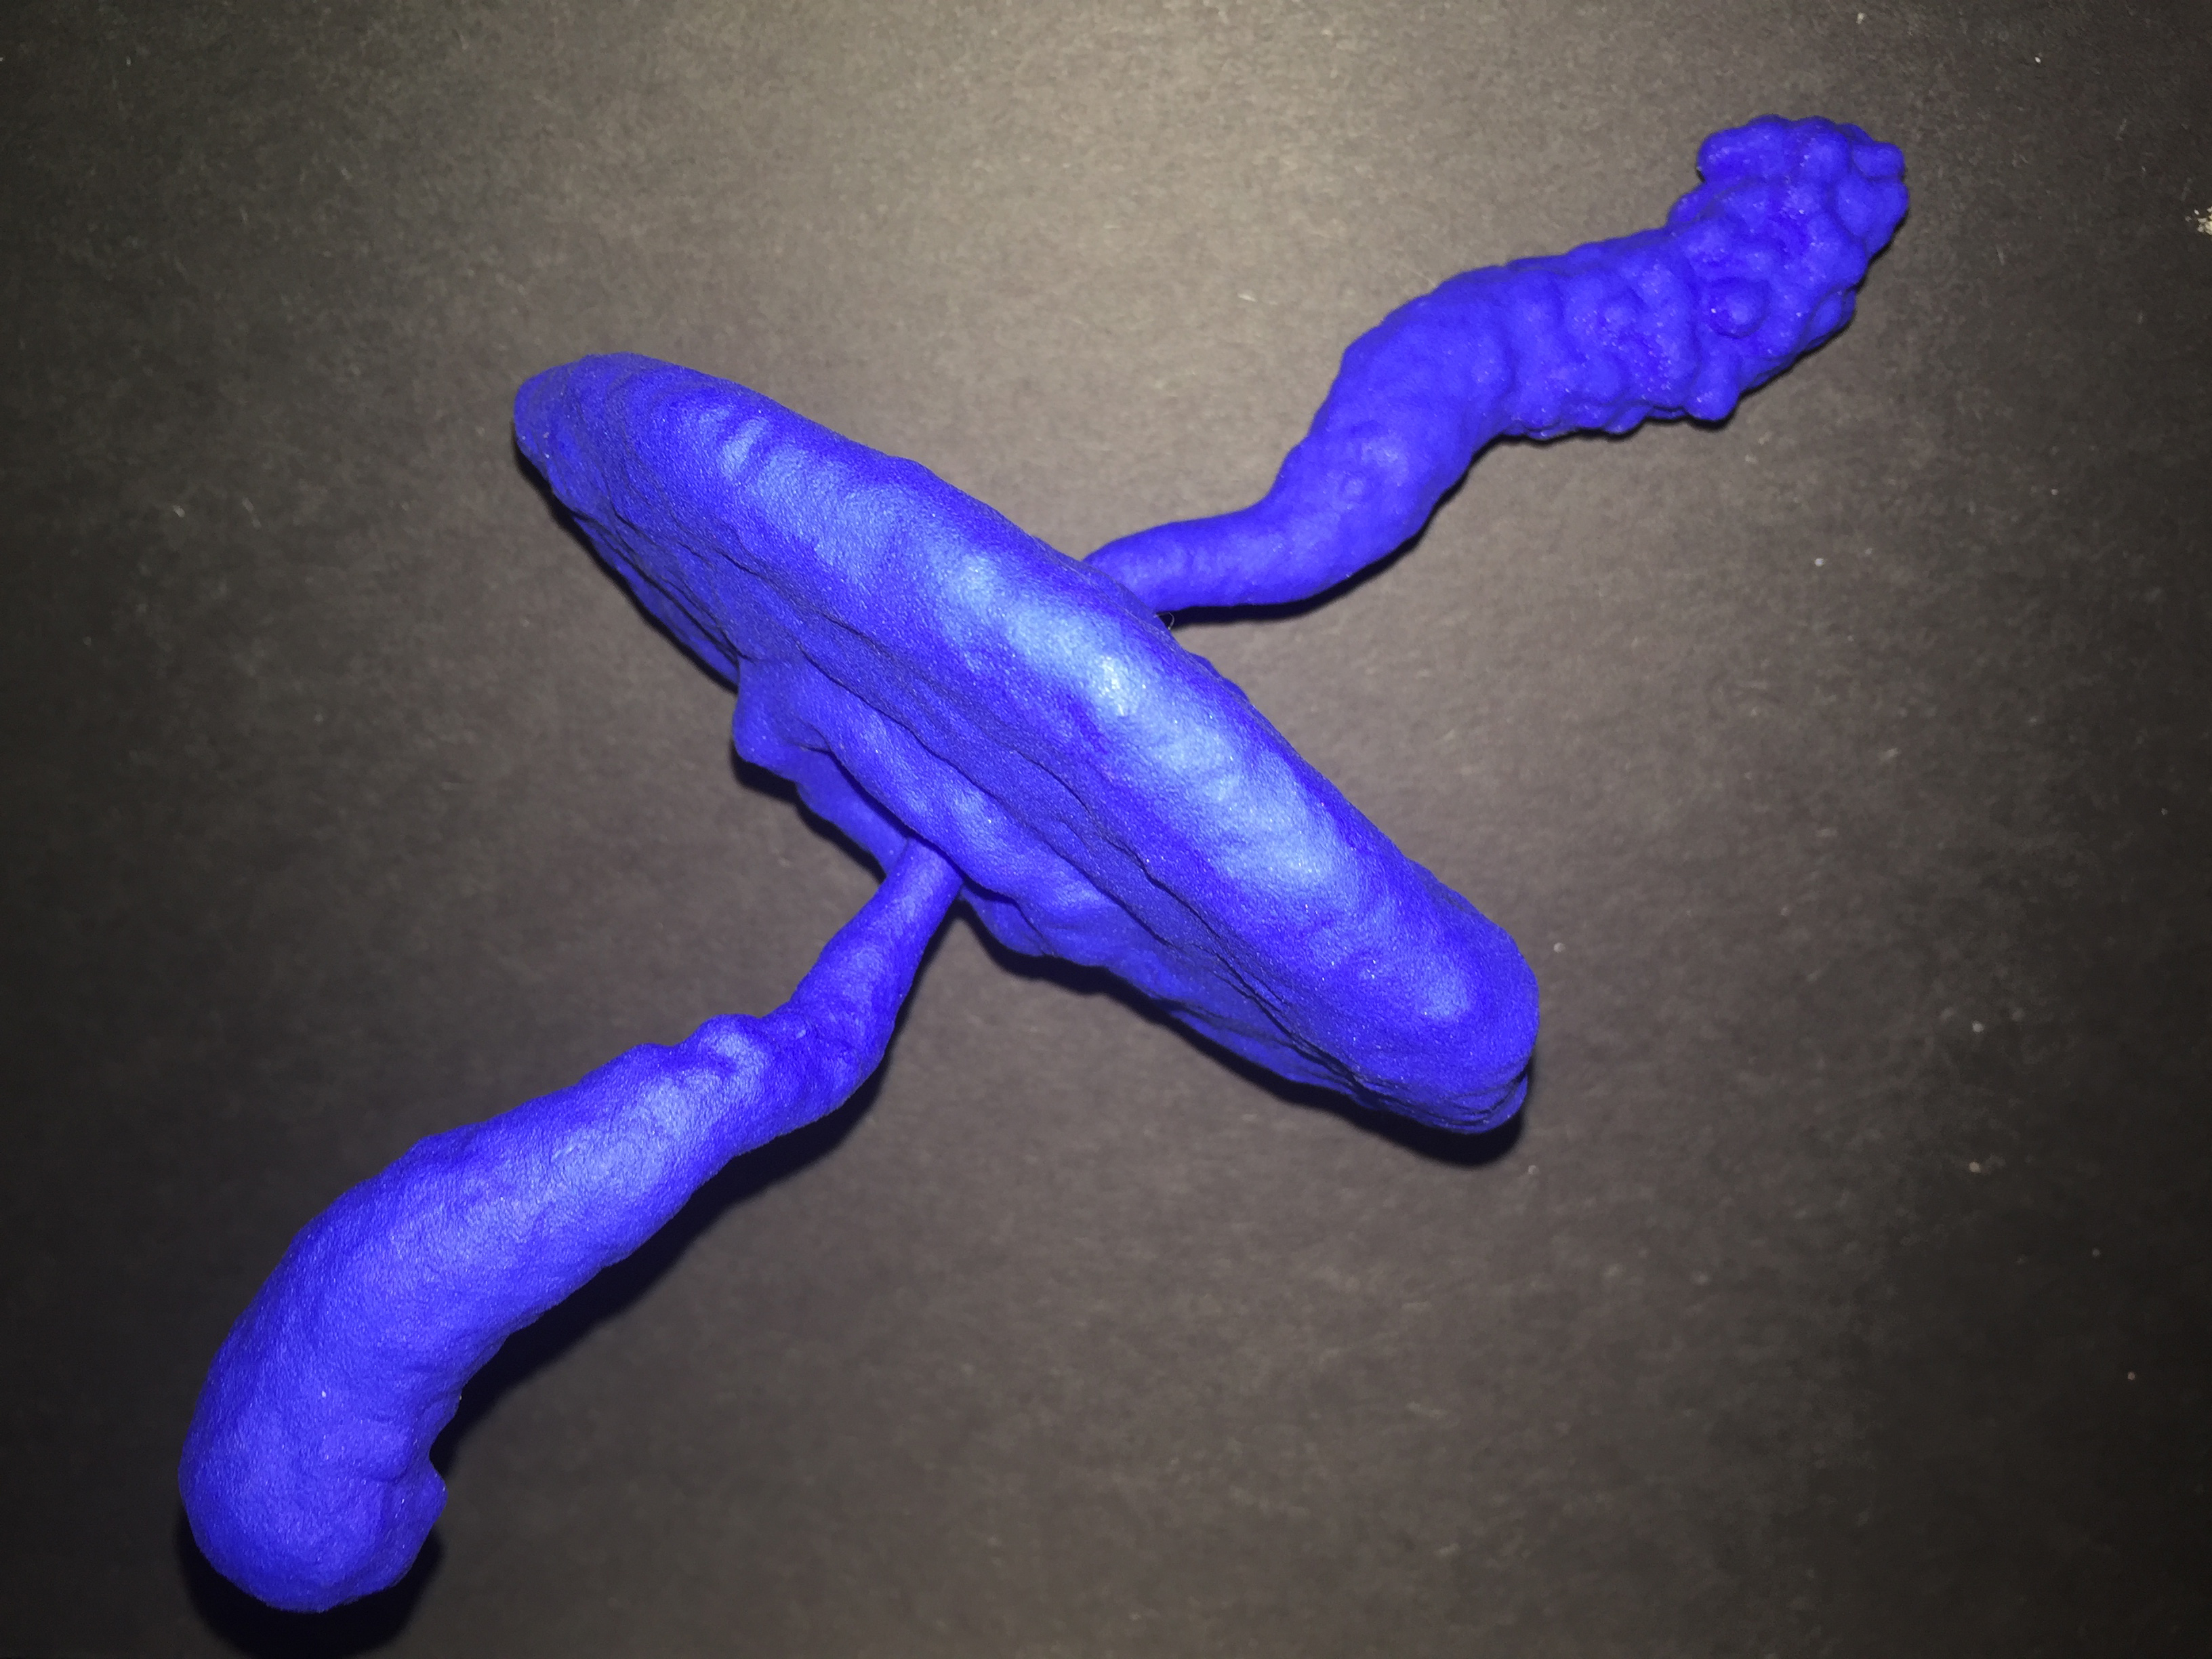 Photo  of a 3D print of Crab Nebula. The print is about 8 inches in length and built from blue plastic. The model's shape is reminiscent of a spinning whirligig toy with a center disc and two handles coming out from the center.